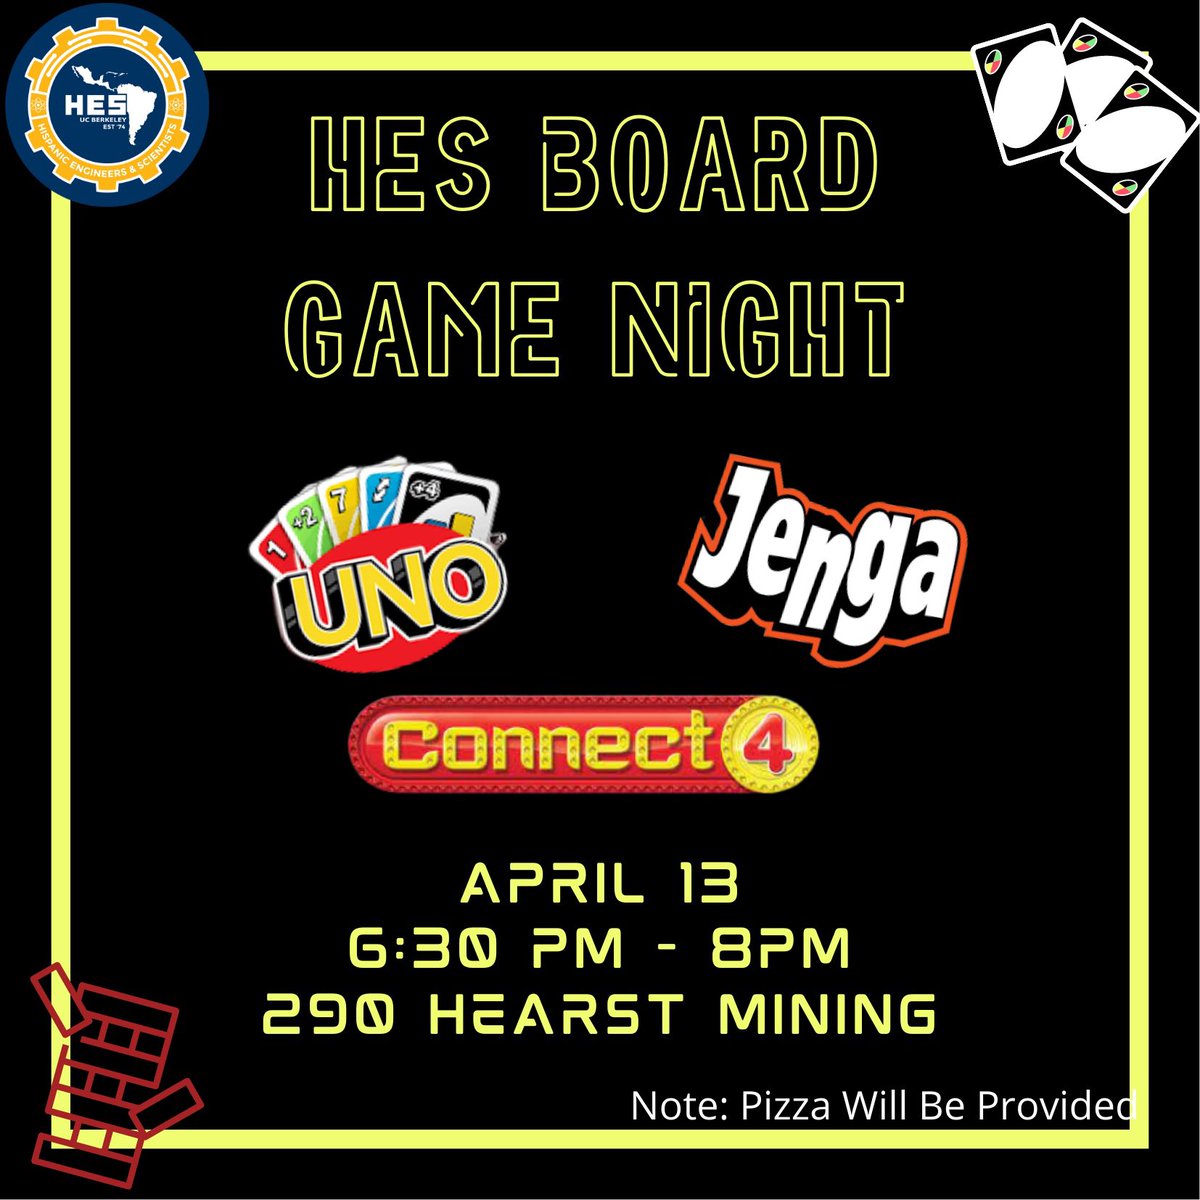 Don’t forget about tonight’s event in an hour! Join the HES Board and have fun with games and some delicious pizza 🥰😋 P.S you can ask the board any questions about running + being a board member 👀